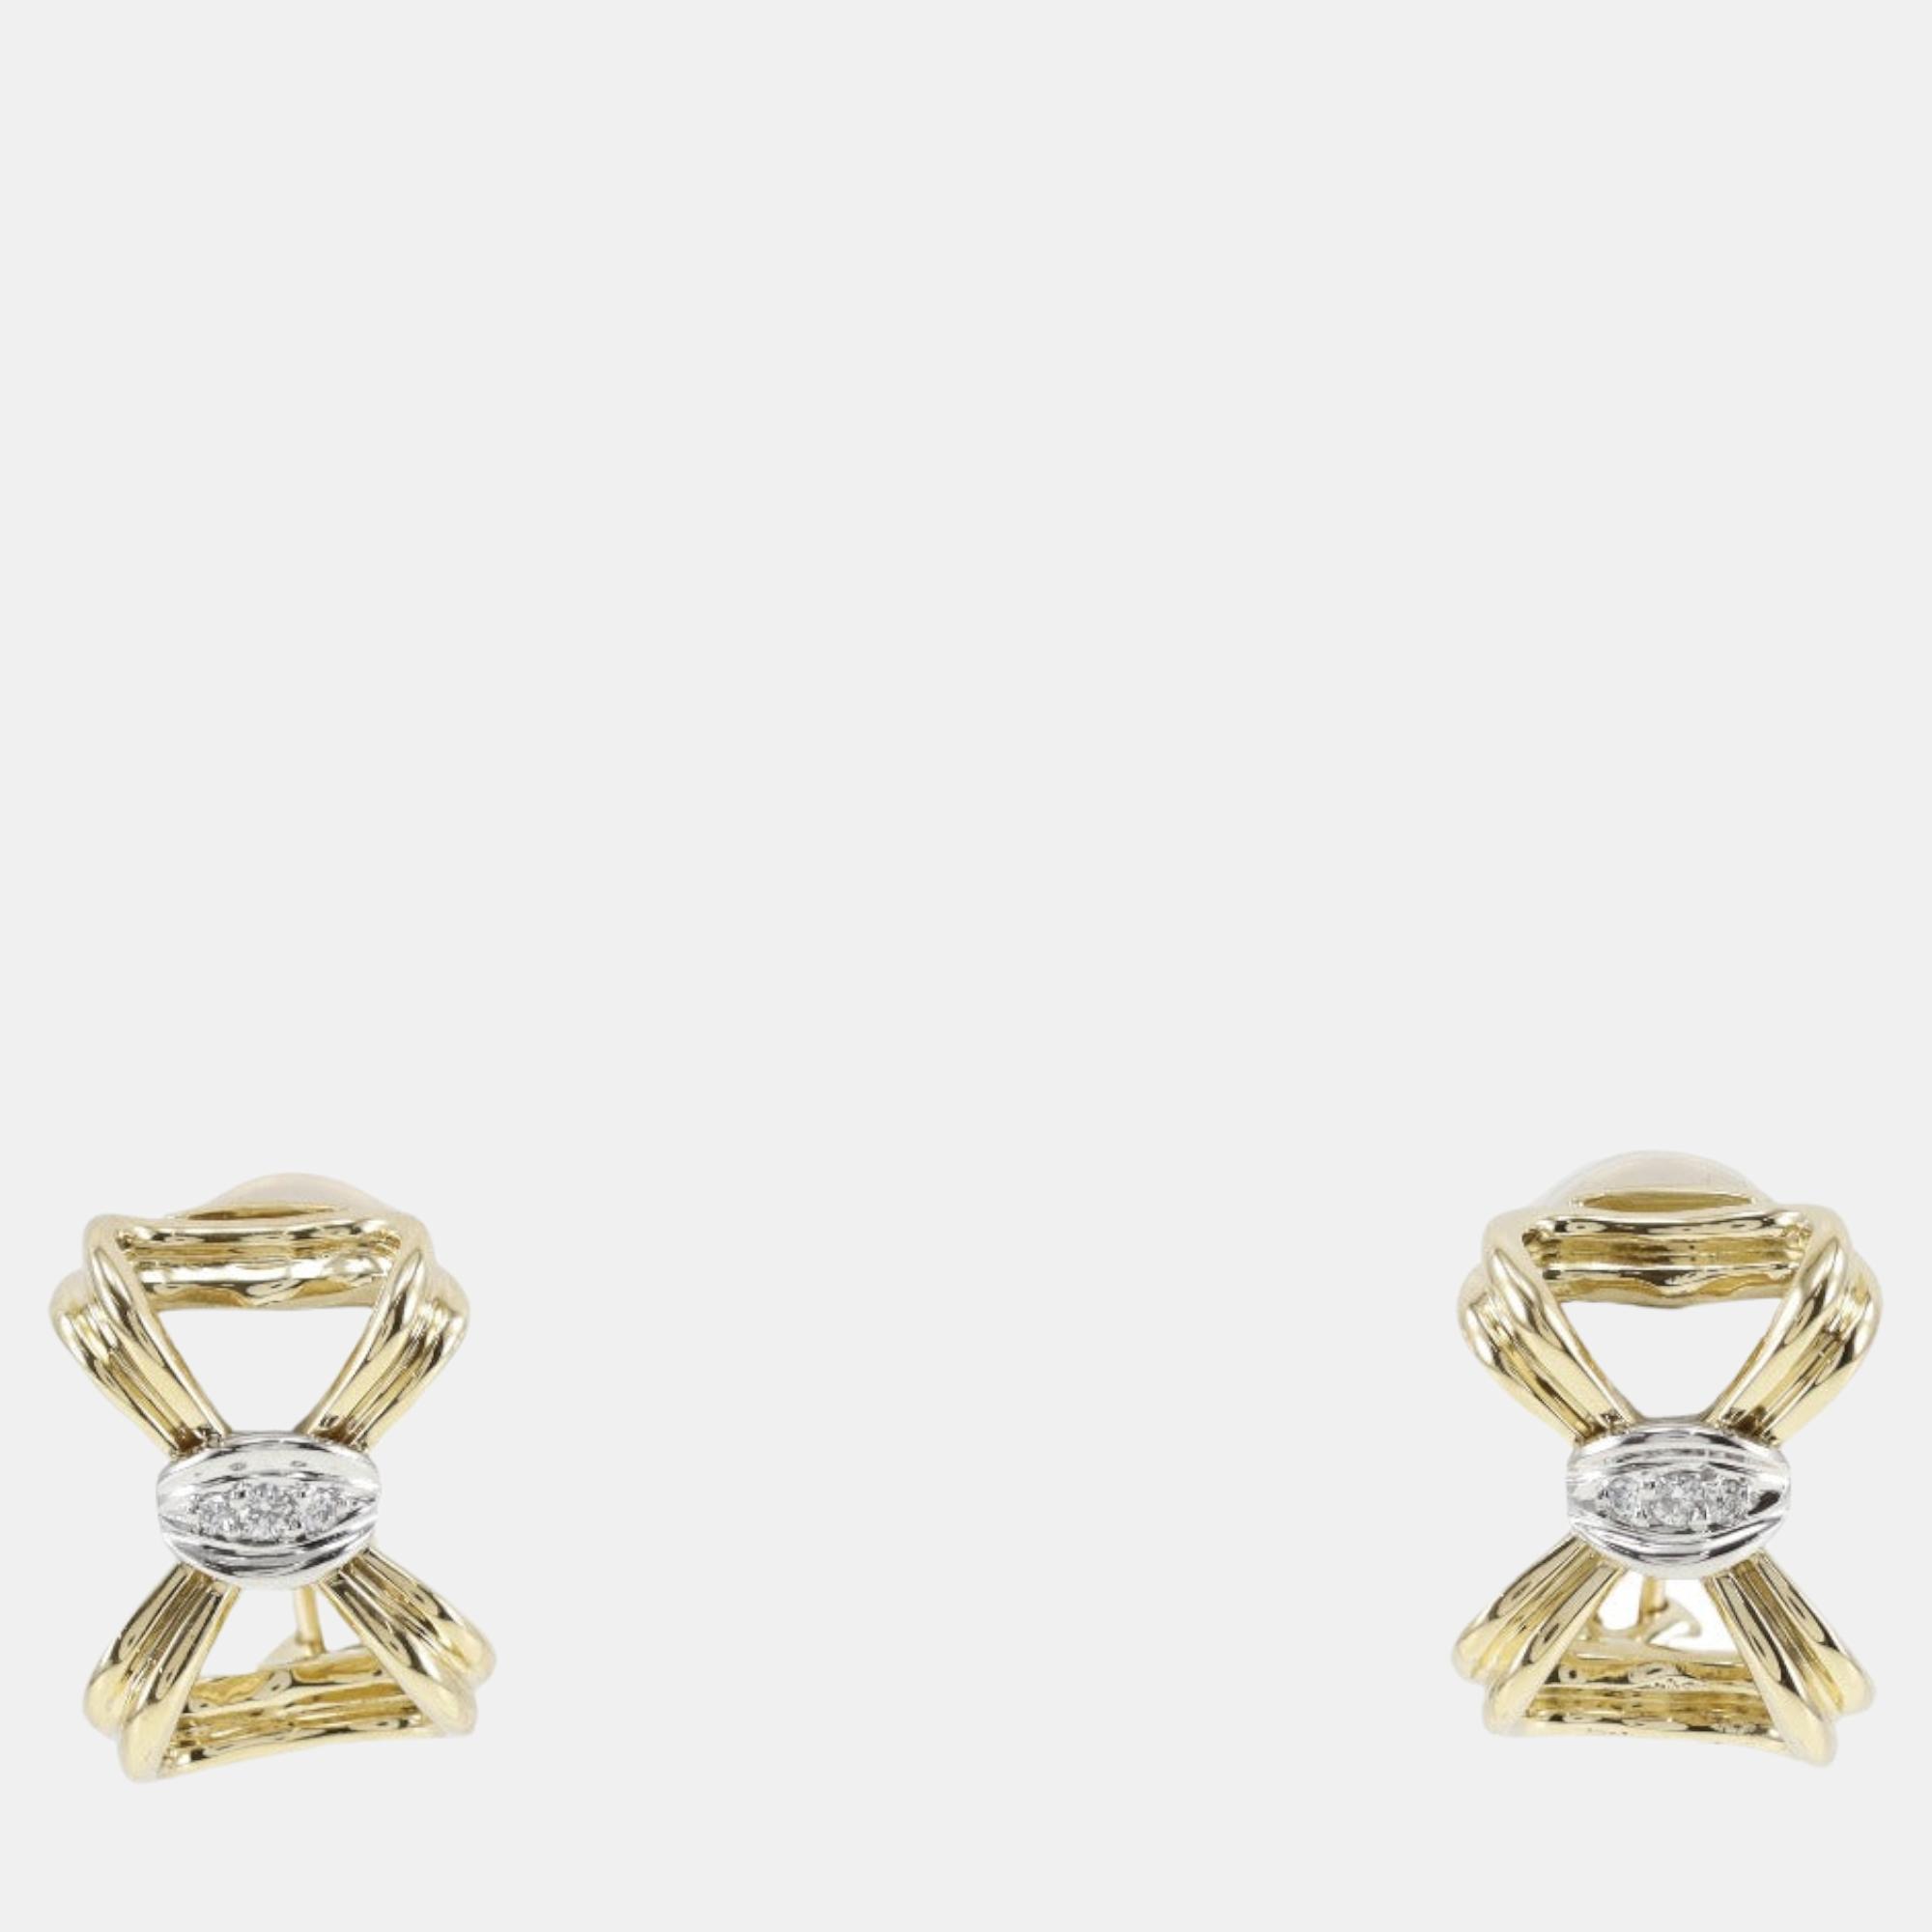 Tiffany & co. platinum, 18k yellow gold bow earring